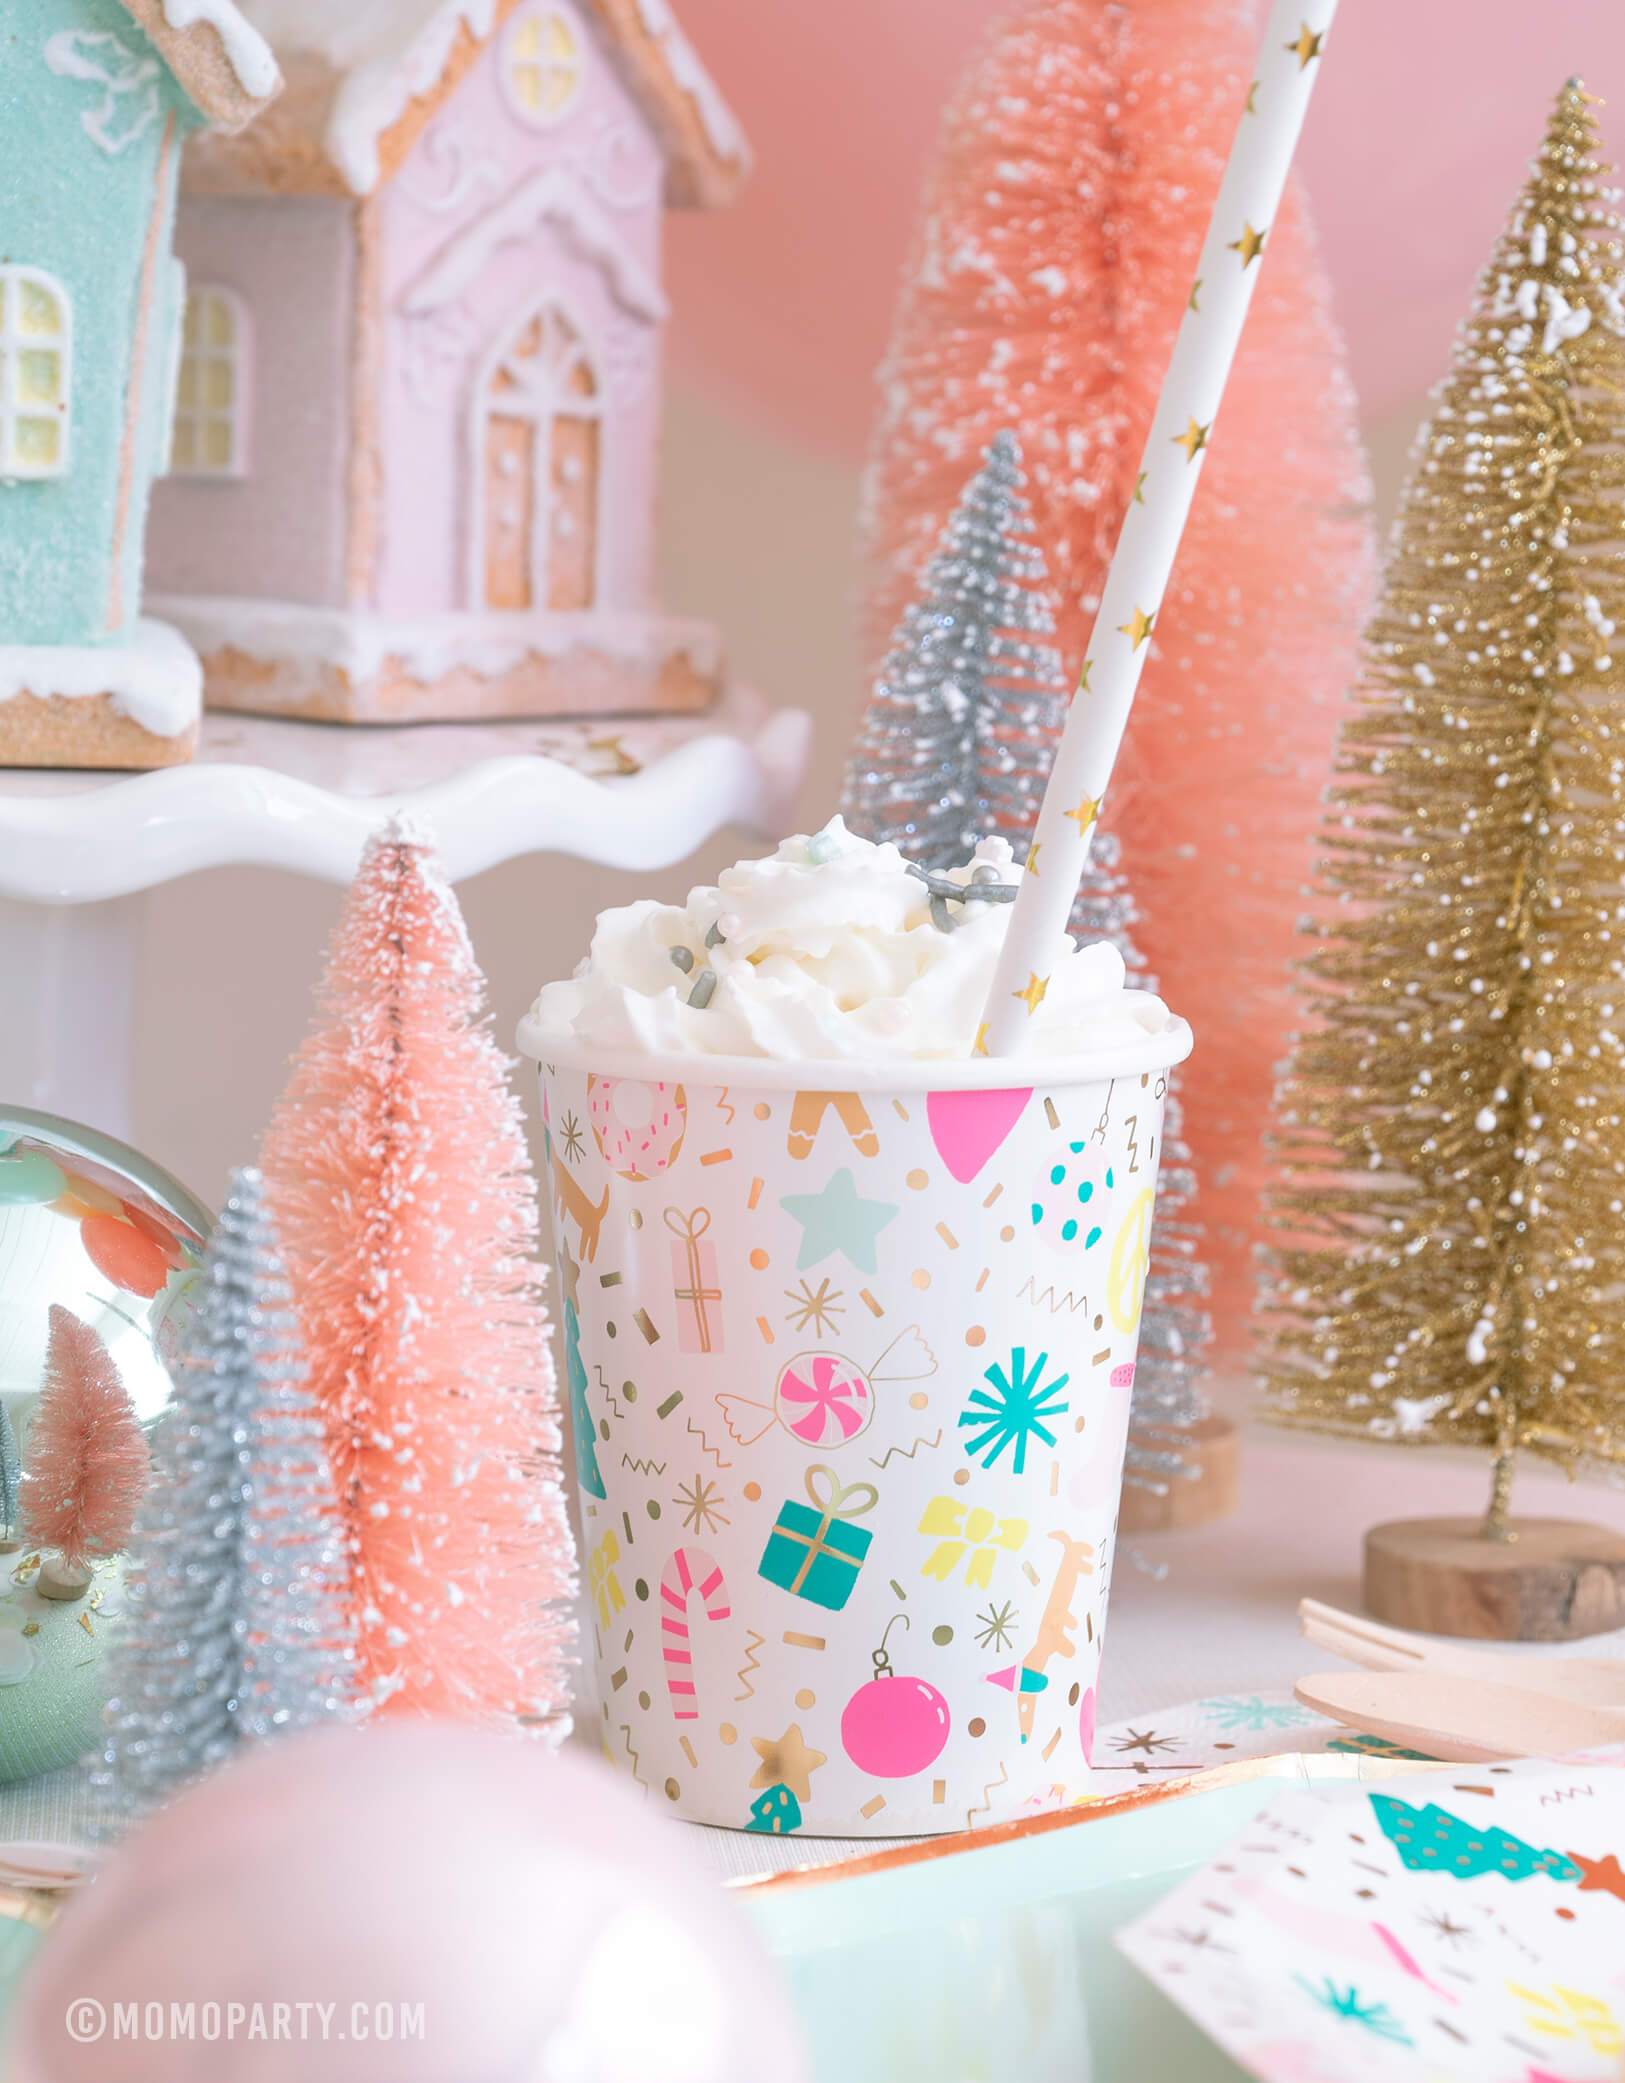 Pink Gingerbread House Paper Party Cups